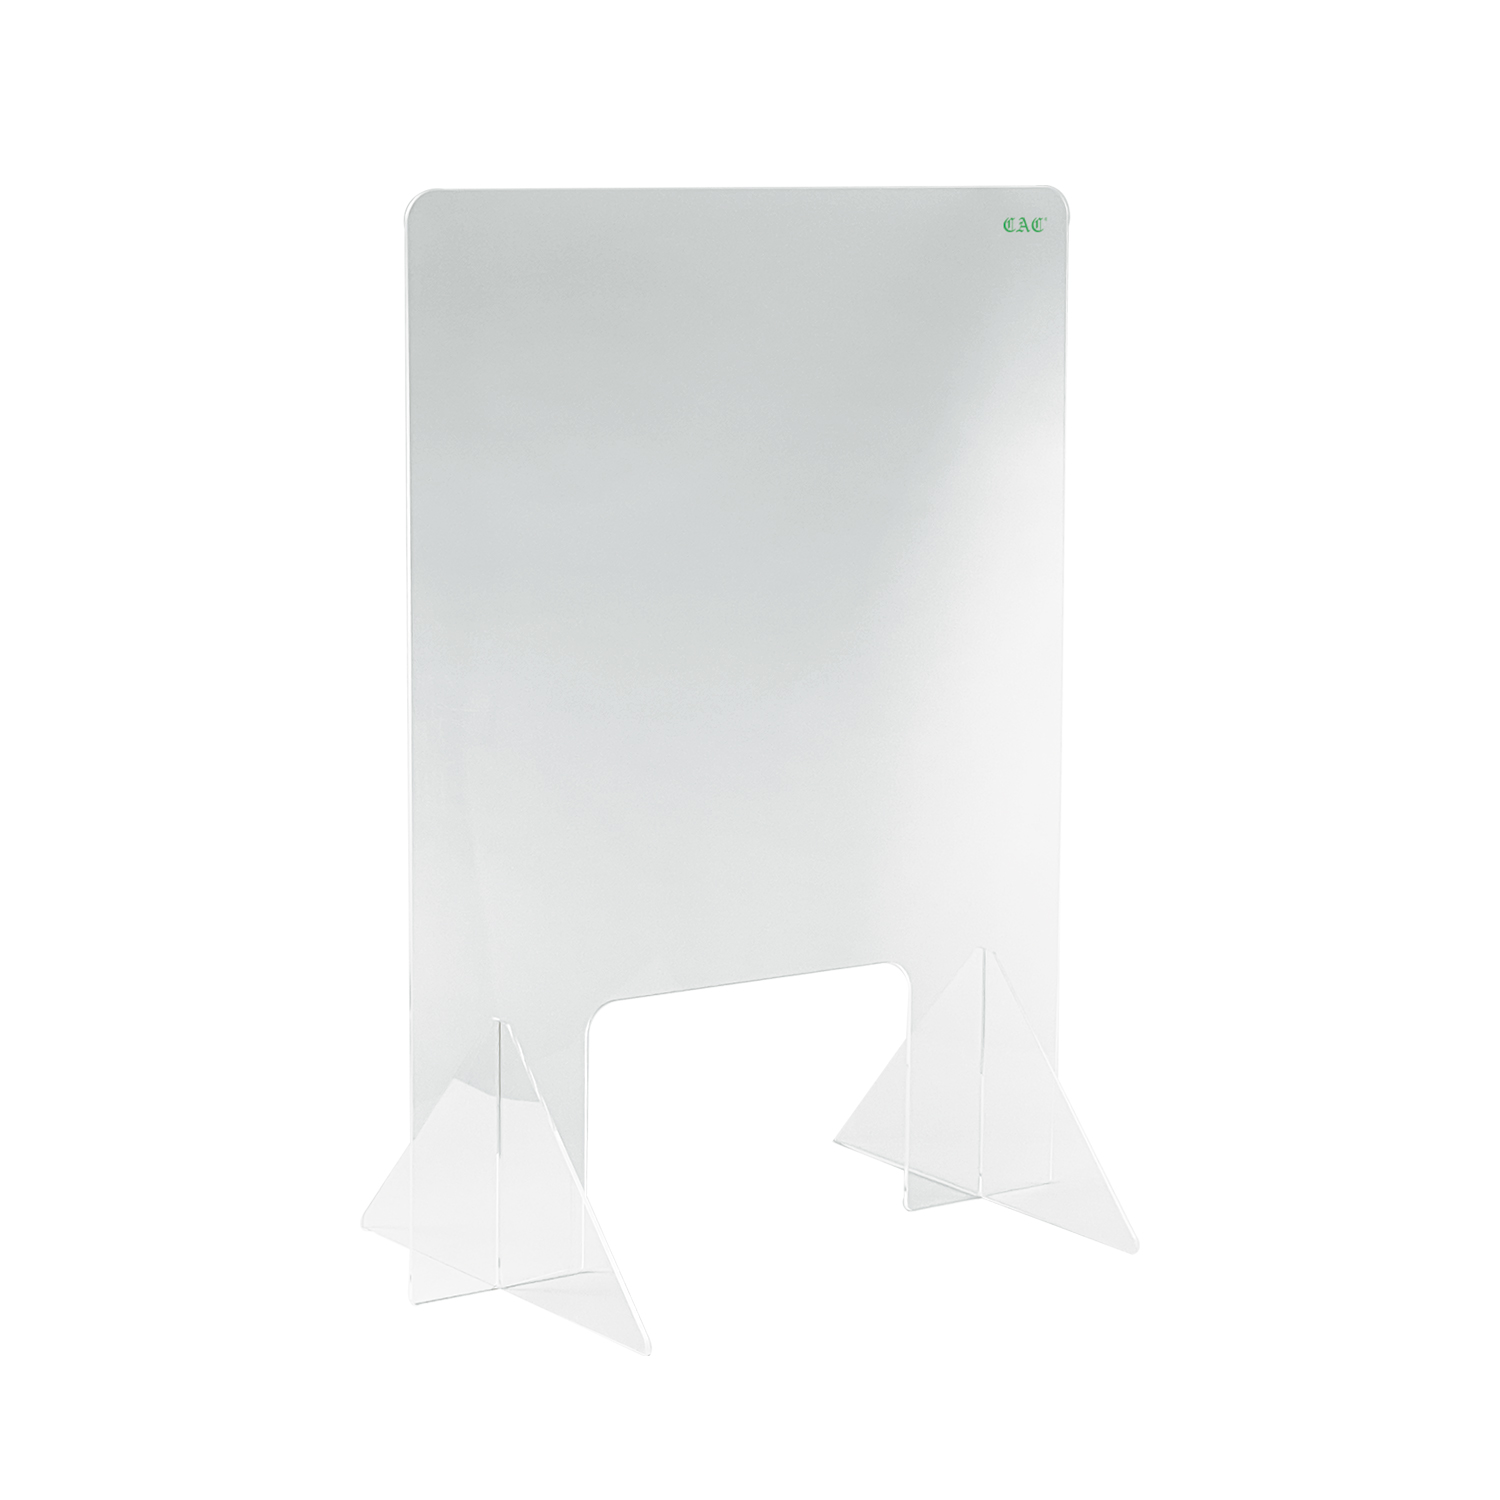 CAC China SHLD-2432 Self-Standing Acrylic Shield with Window 24" W x 32" H